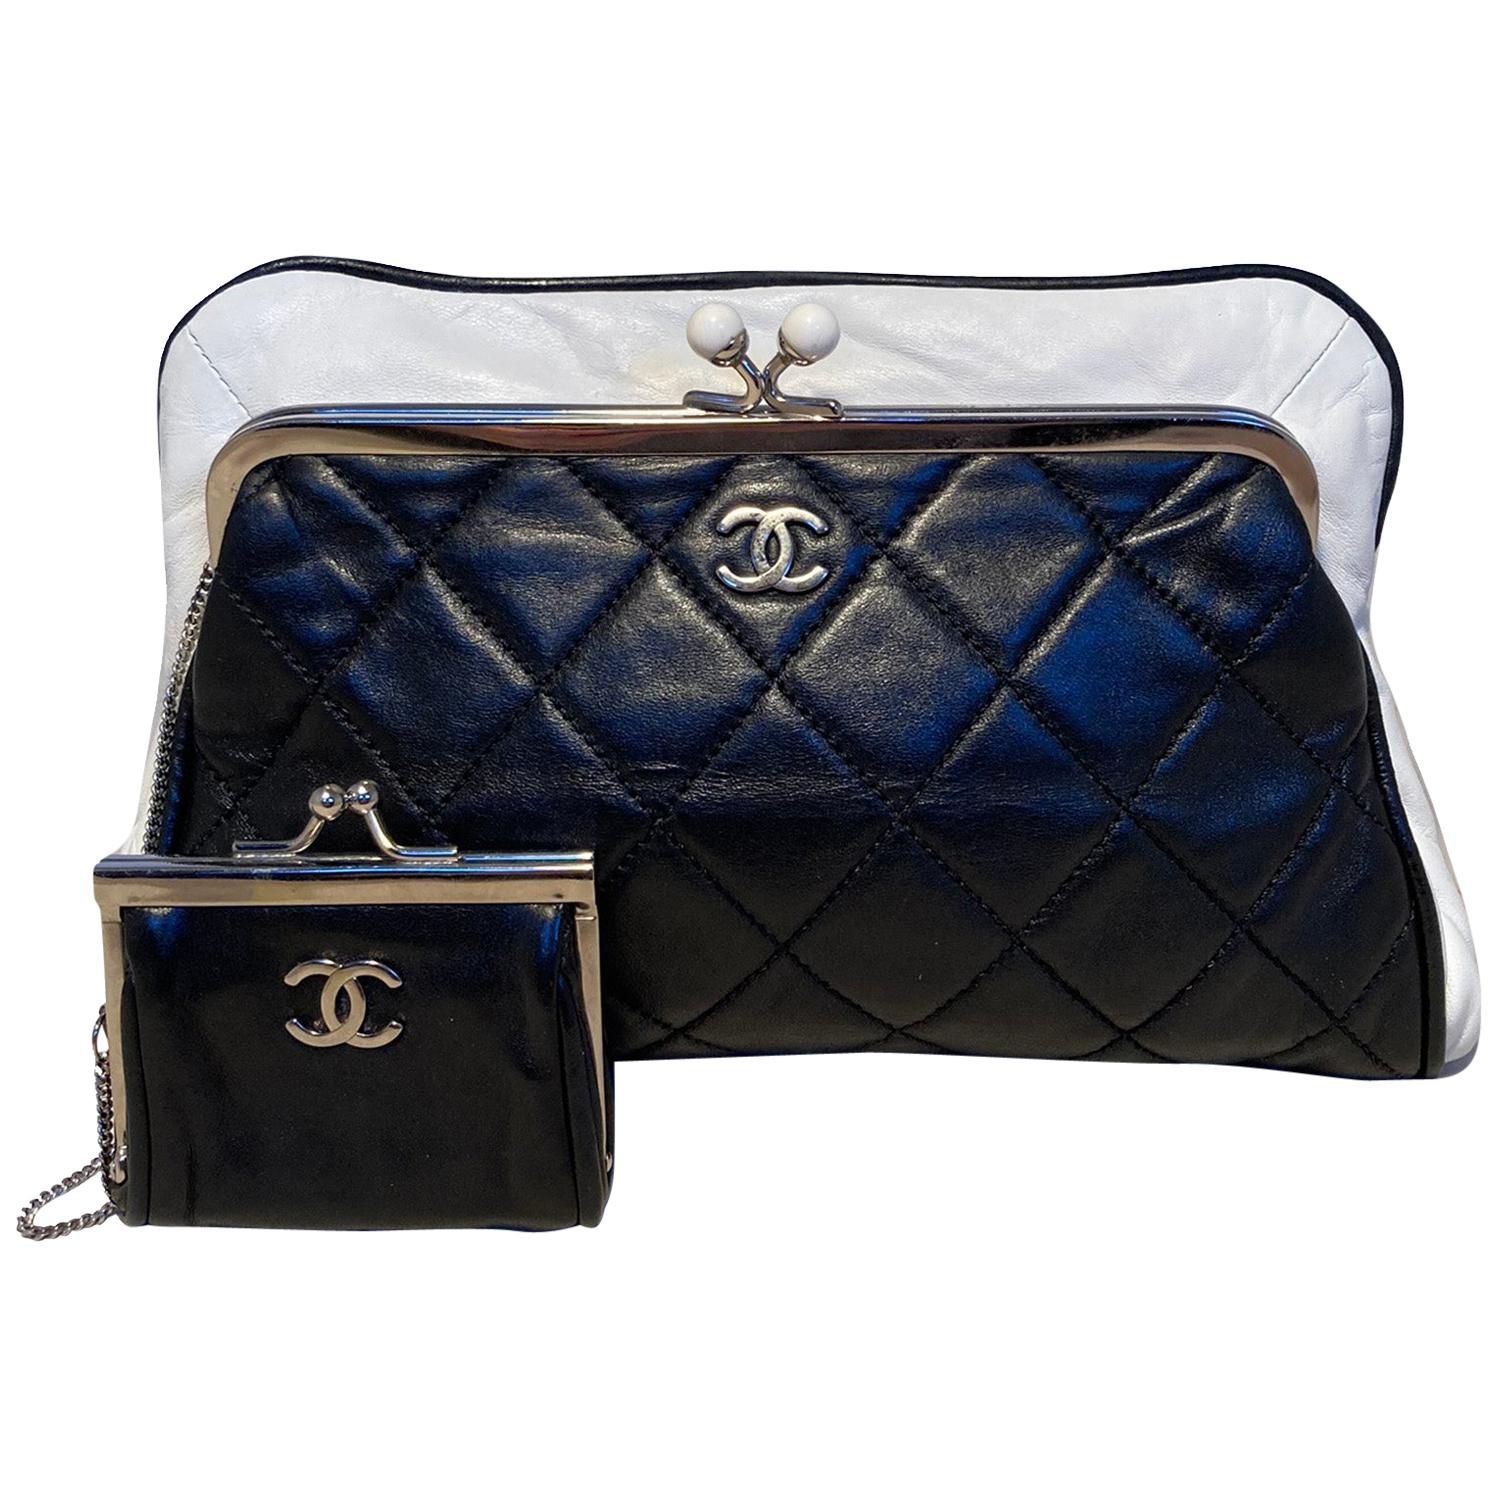 Chanel Black and White Kiss Lock Clutch with Coin Pouch